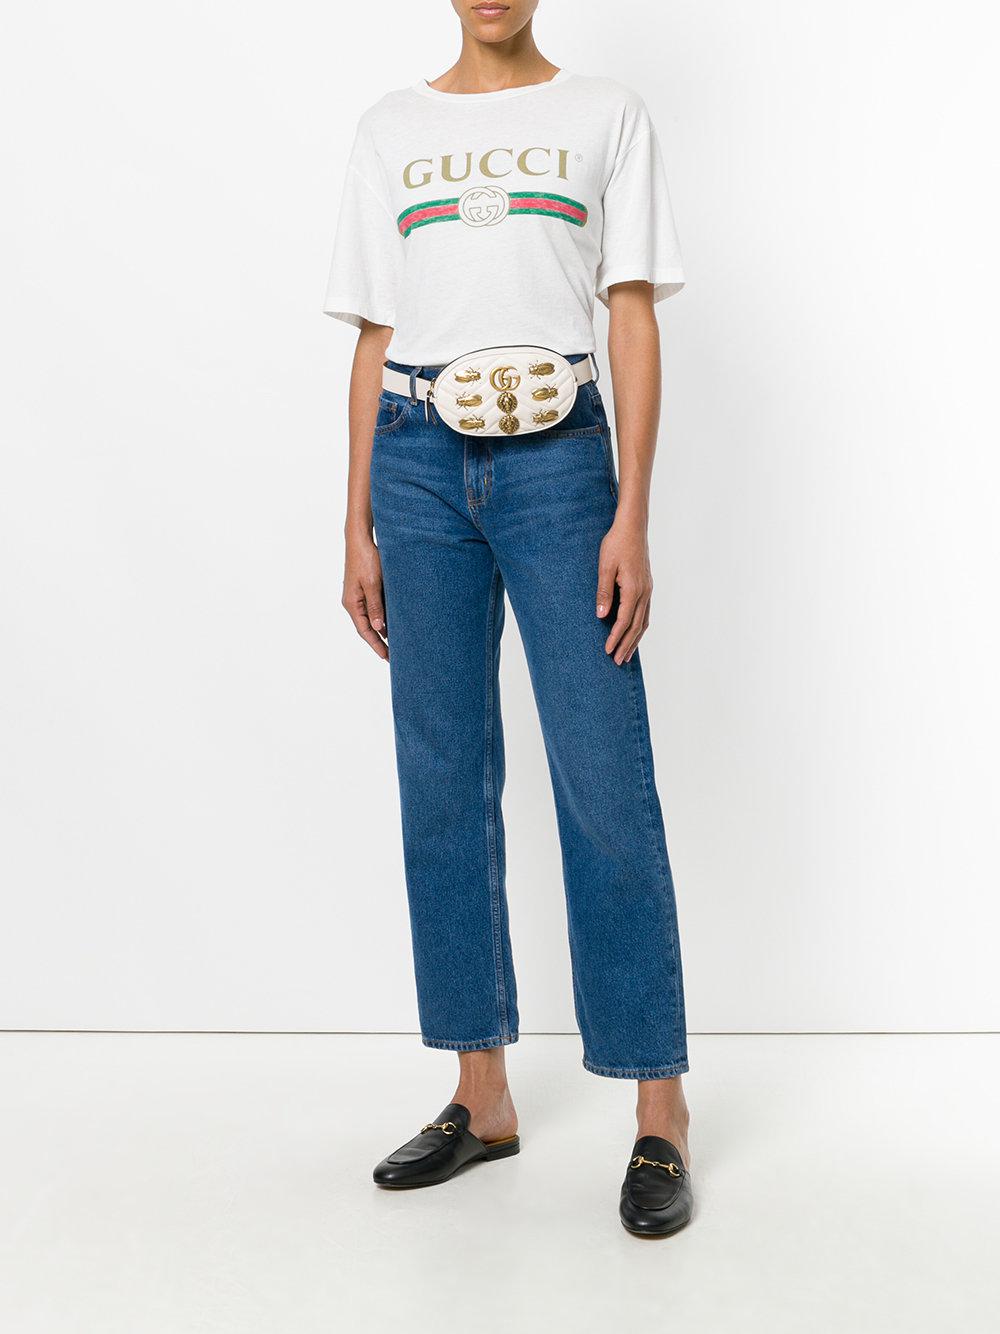 Gucci Leather Gg Marmont Belt Bag in White - Lyst